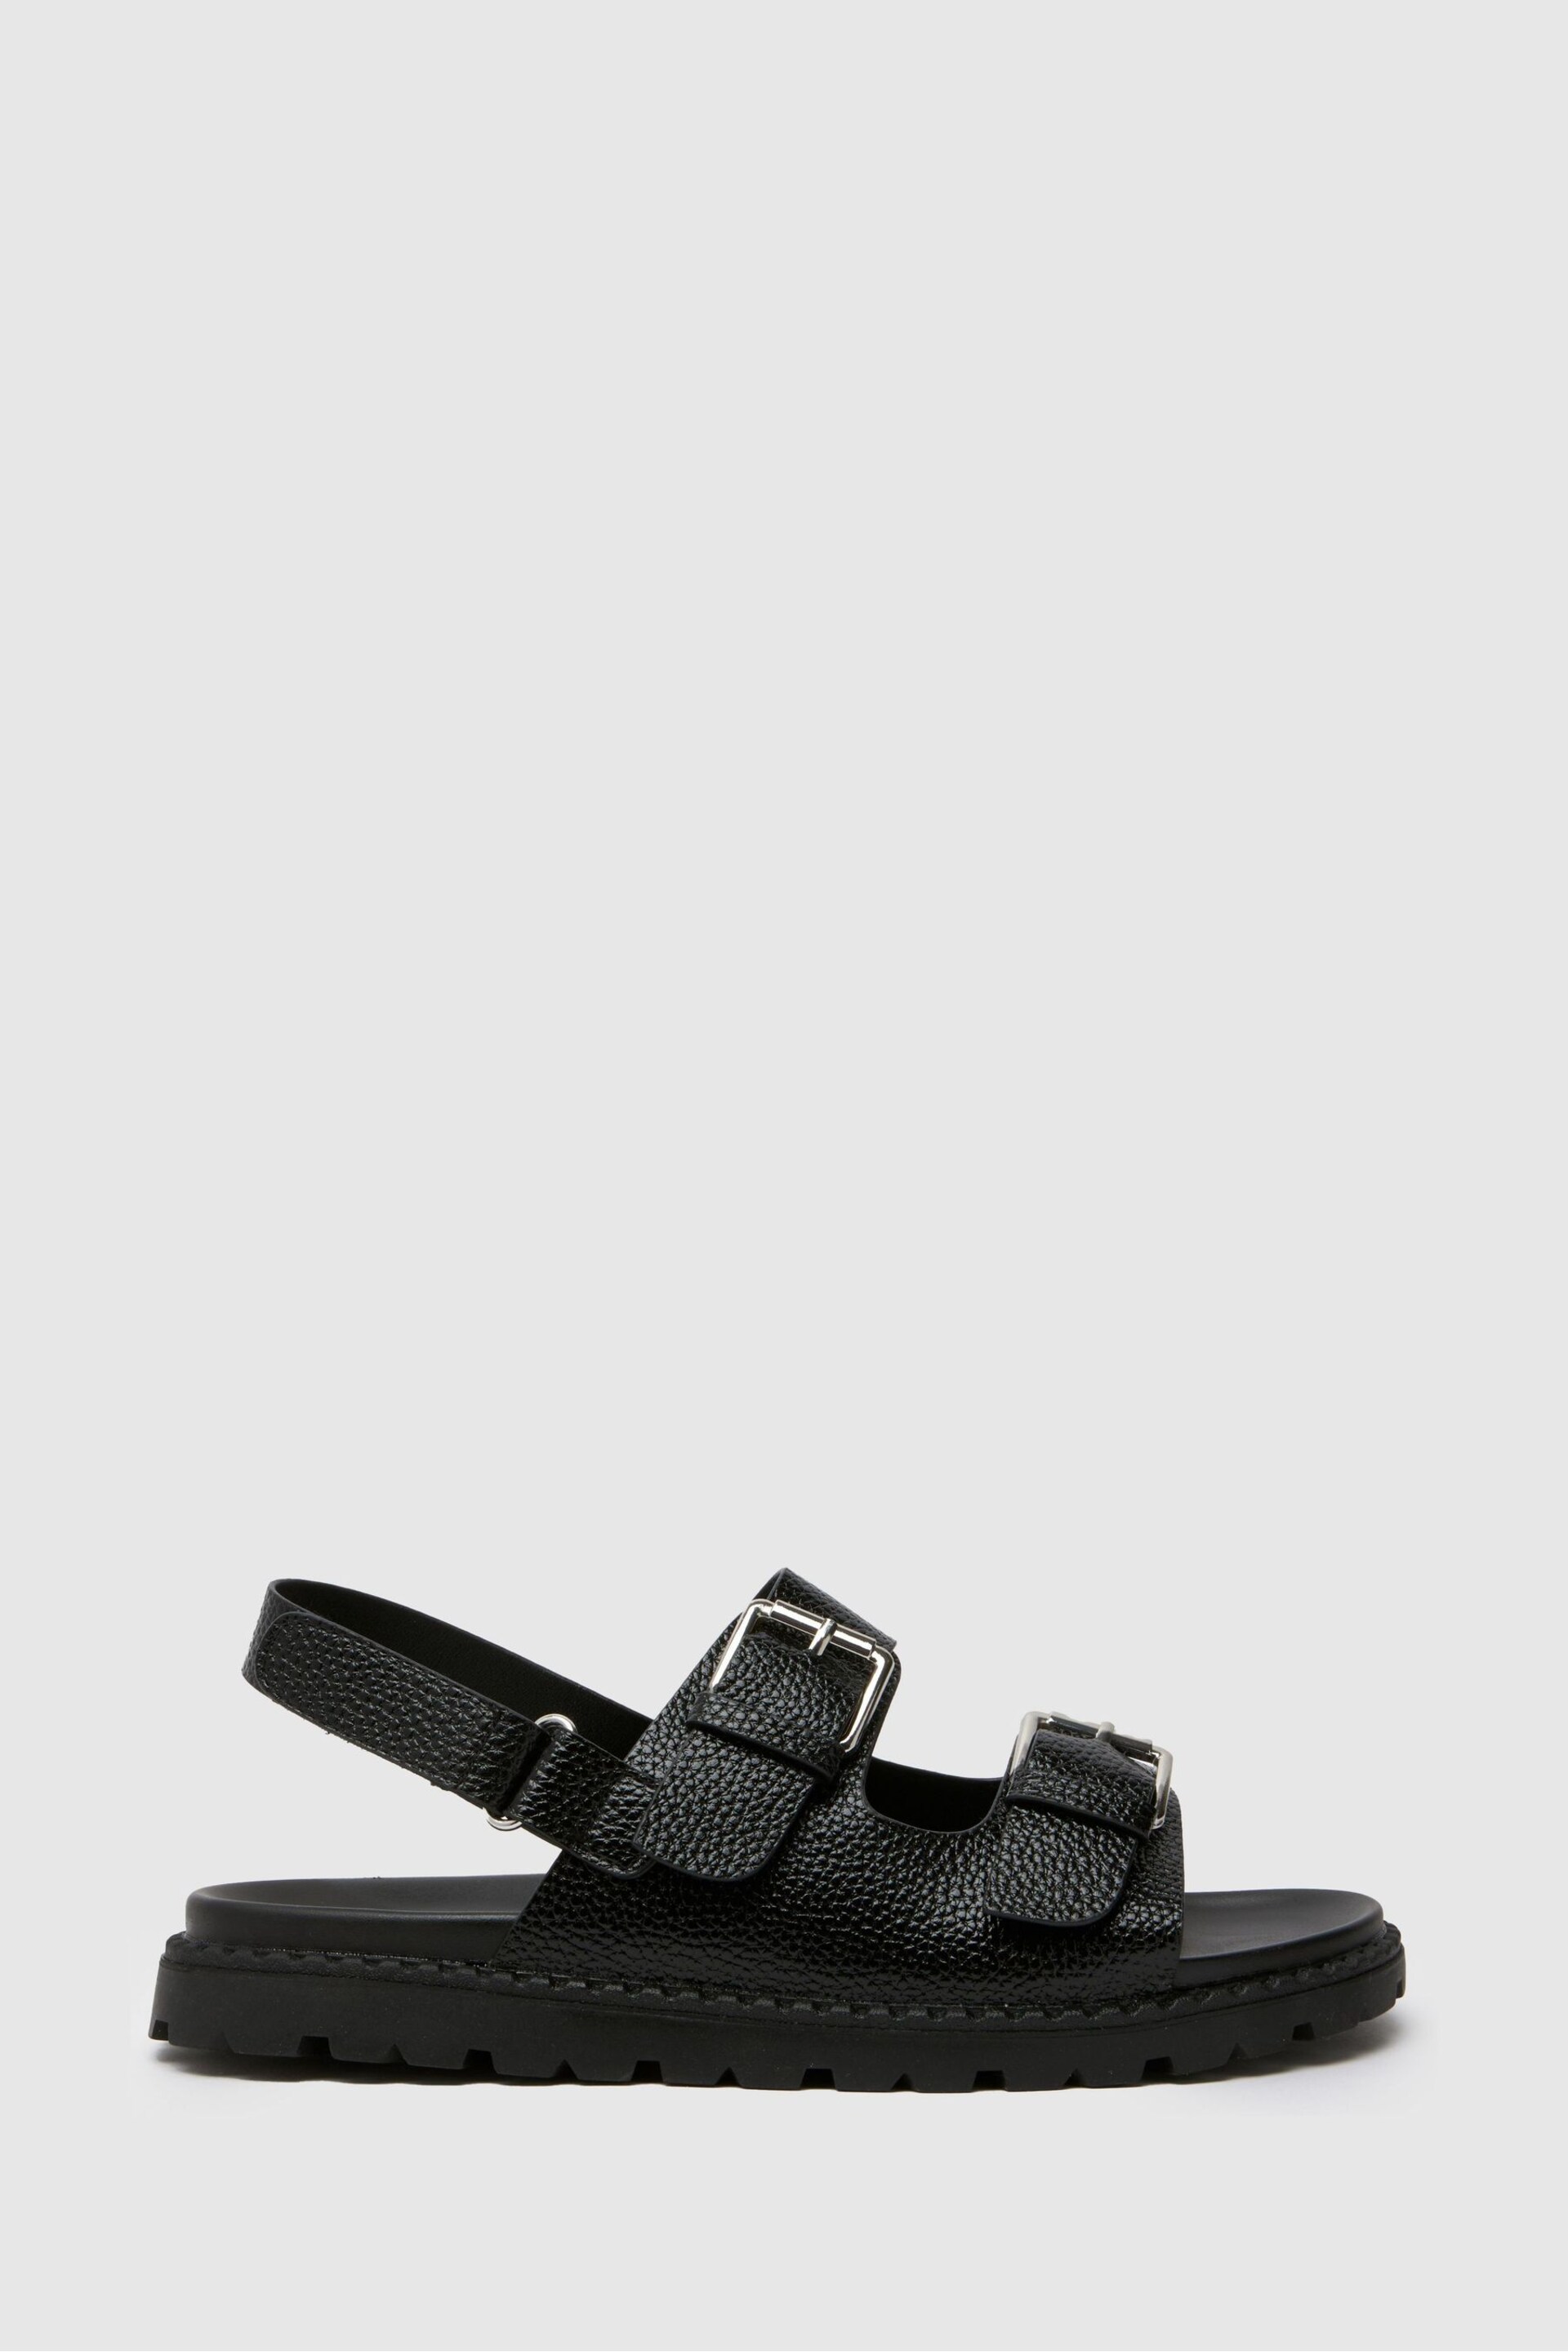 Schuh Tyra Chunky Footbed Black Sandals - Image 1 of 4